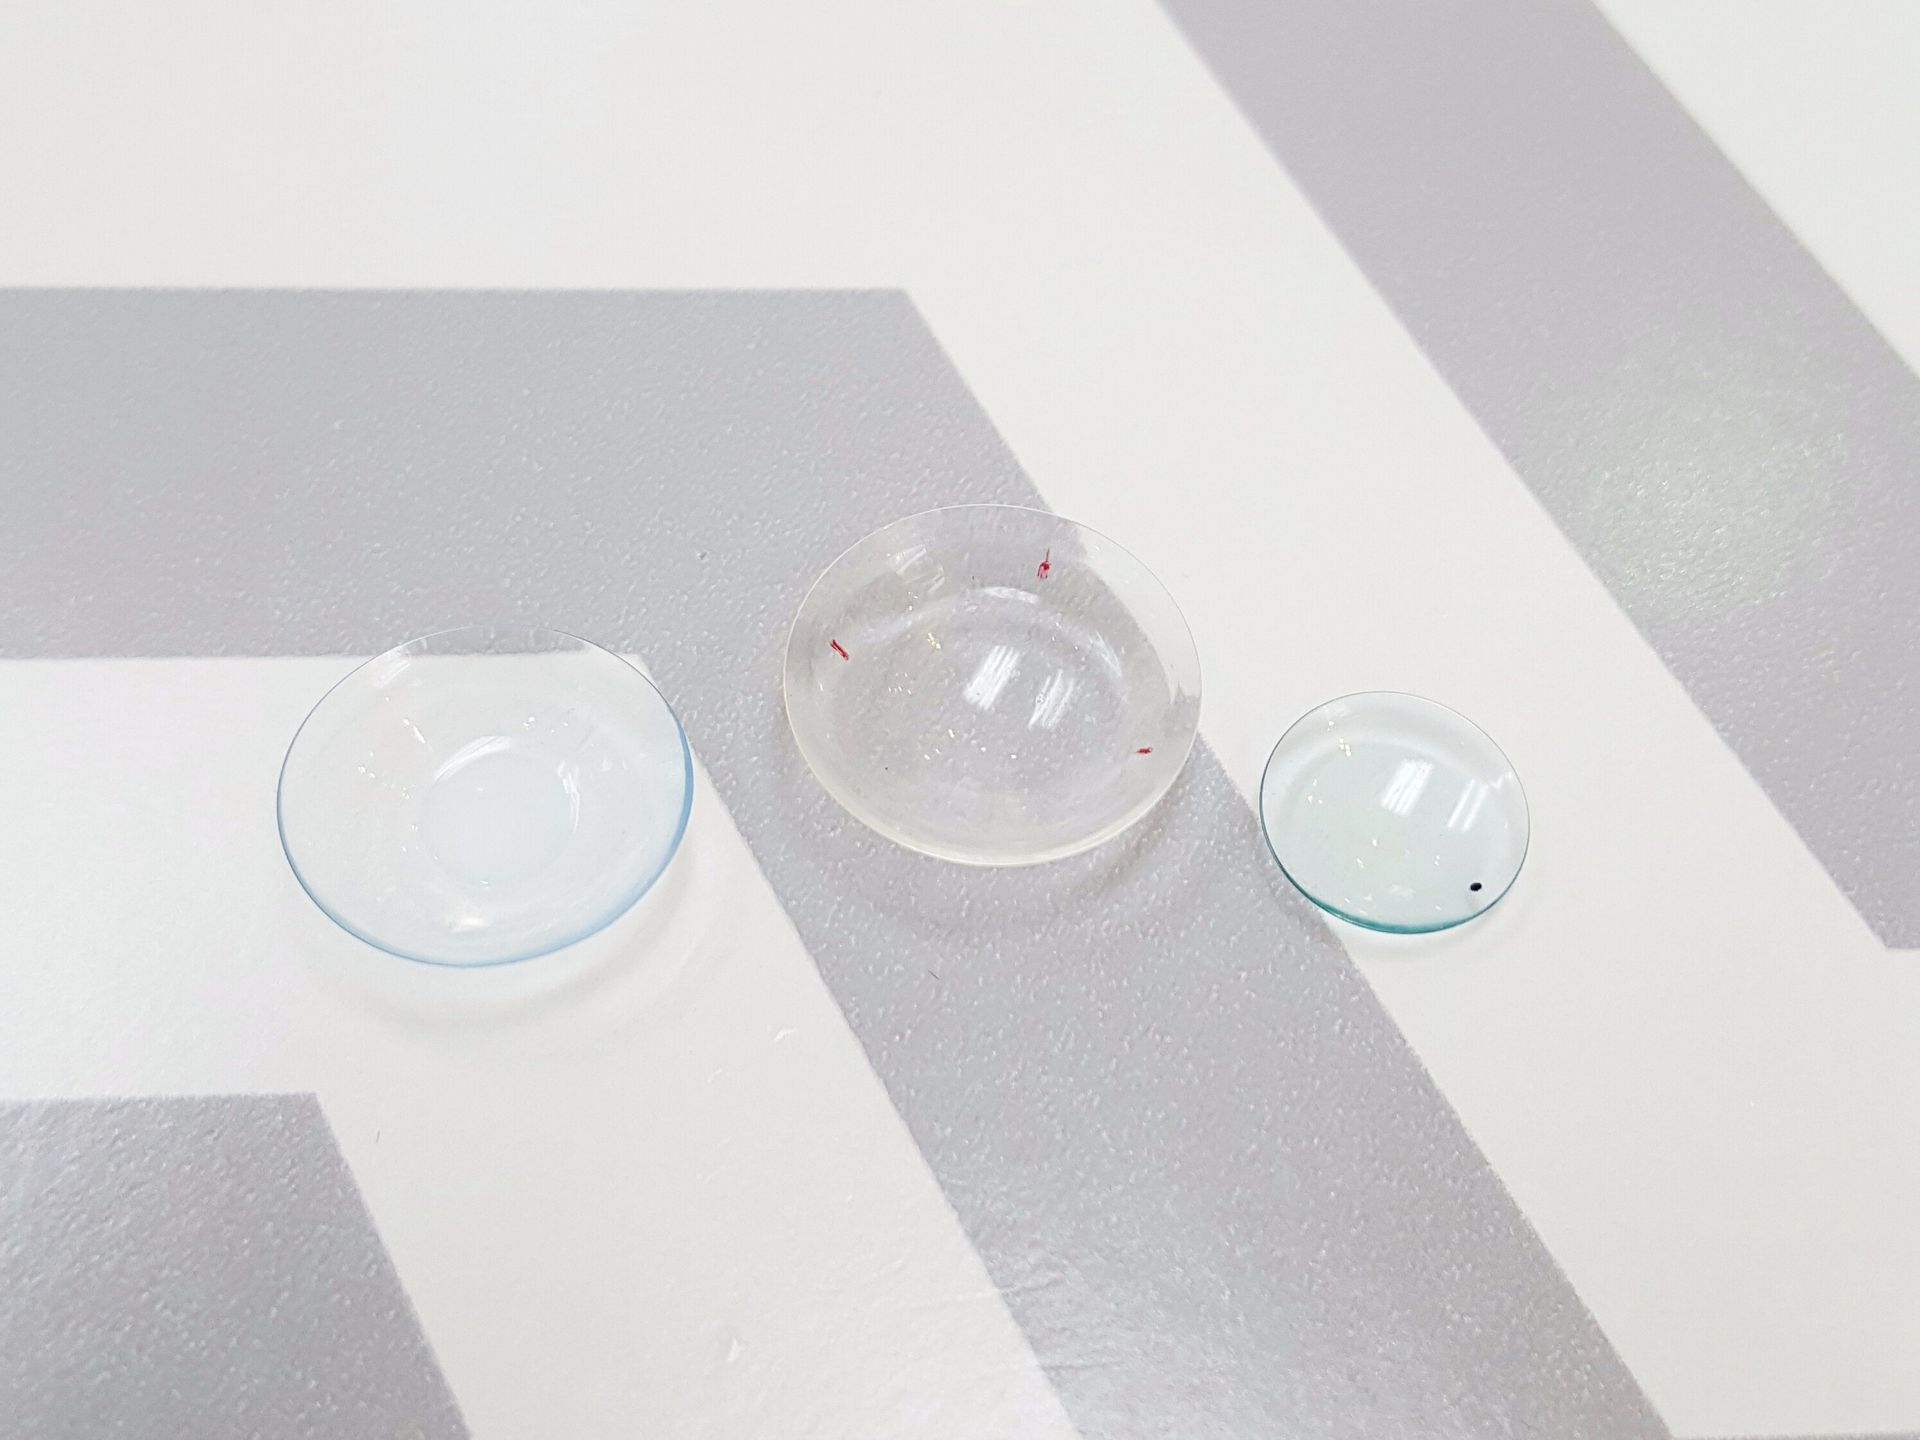 size comparison of a soft contact lens, a scleral contact lens, and a conventional gas permeable lens